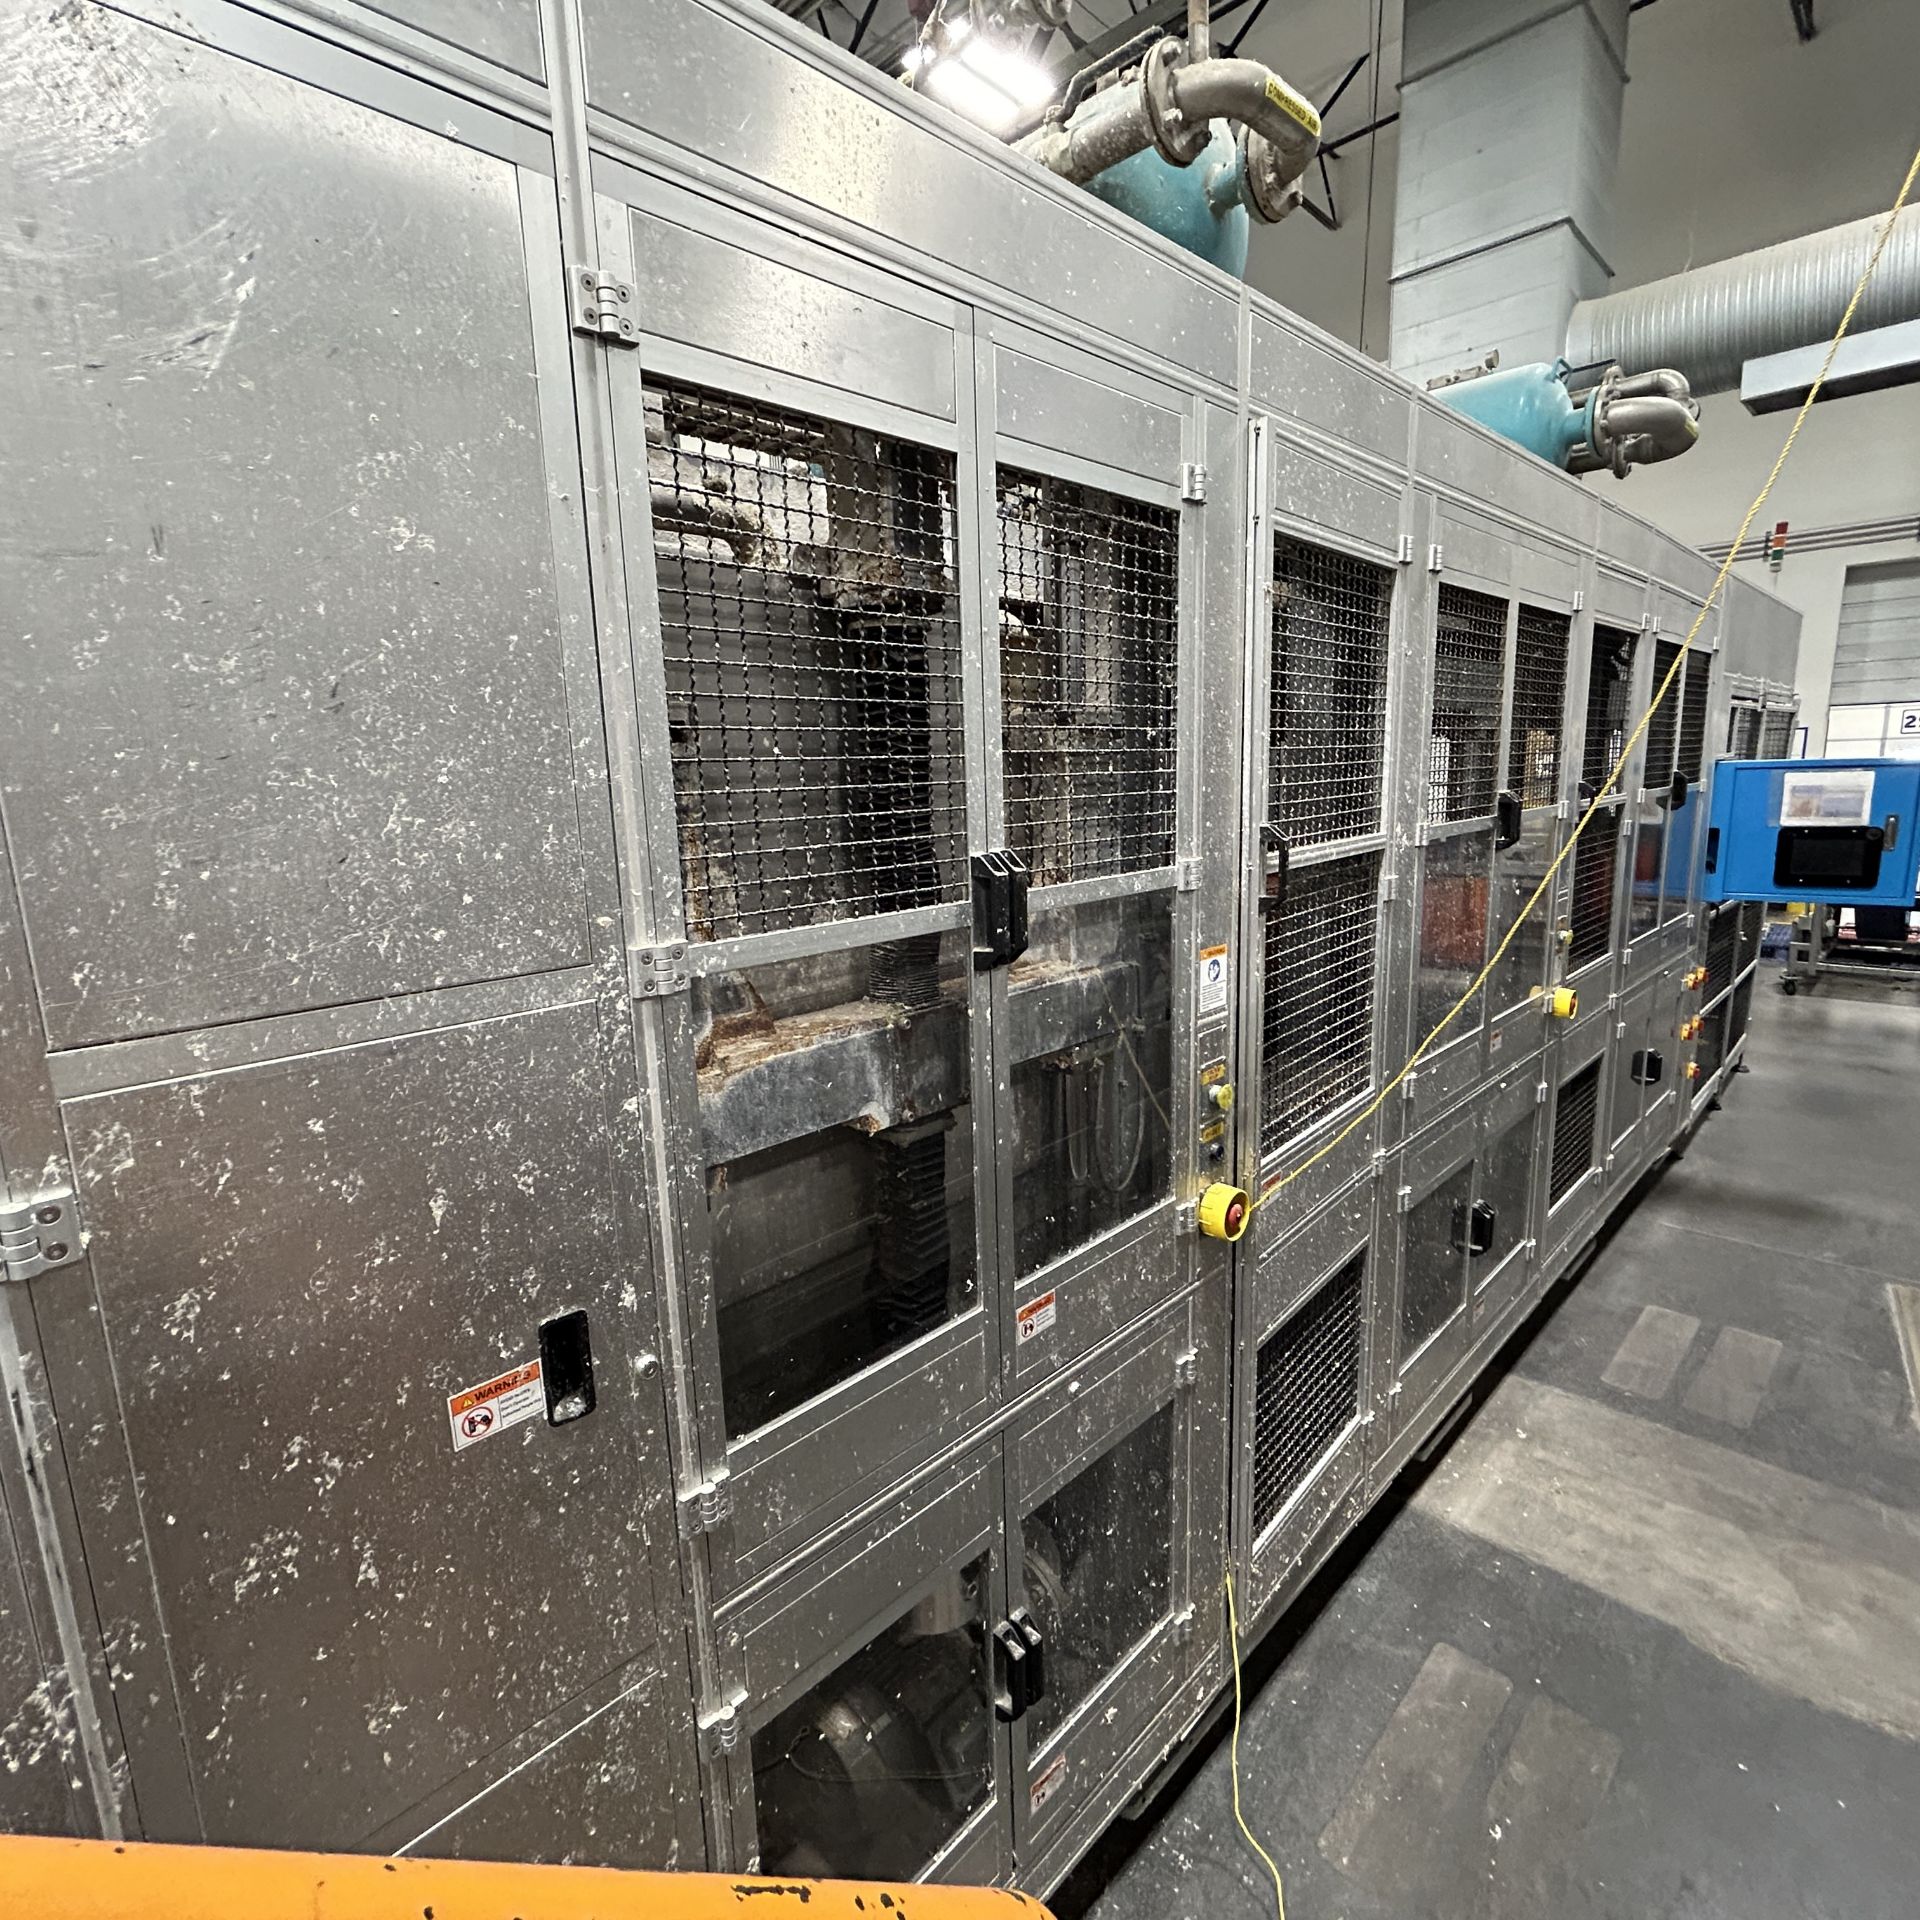 TPM-1500 3-Stage Pulp Thermoforming Machine Equipped With (1) 2018 TPM-AS-1500 2-Stage Auto Stacker - Image 2 of 35